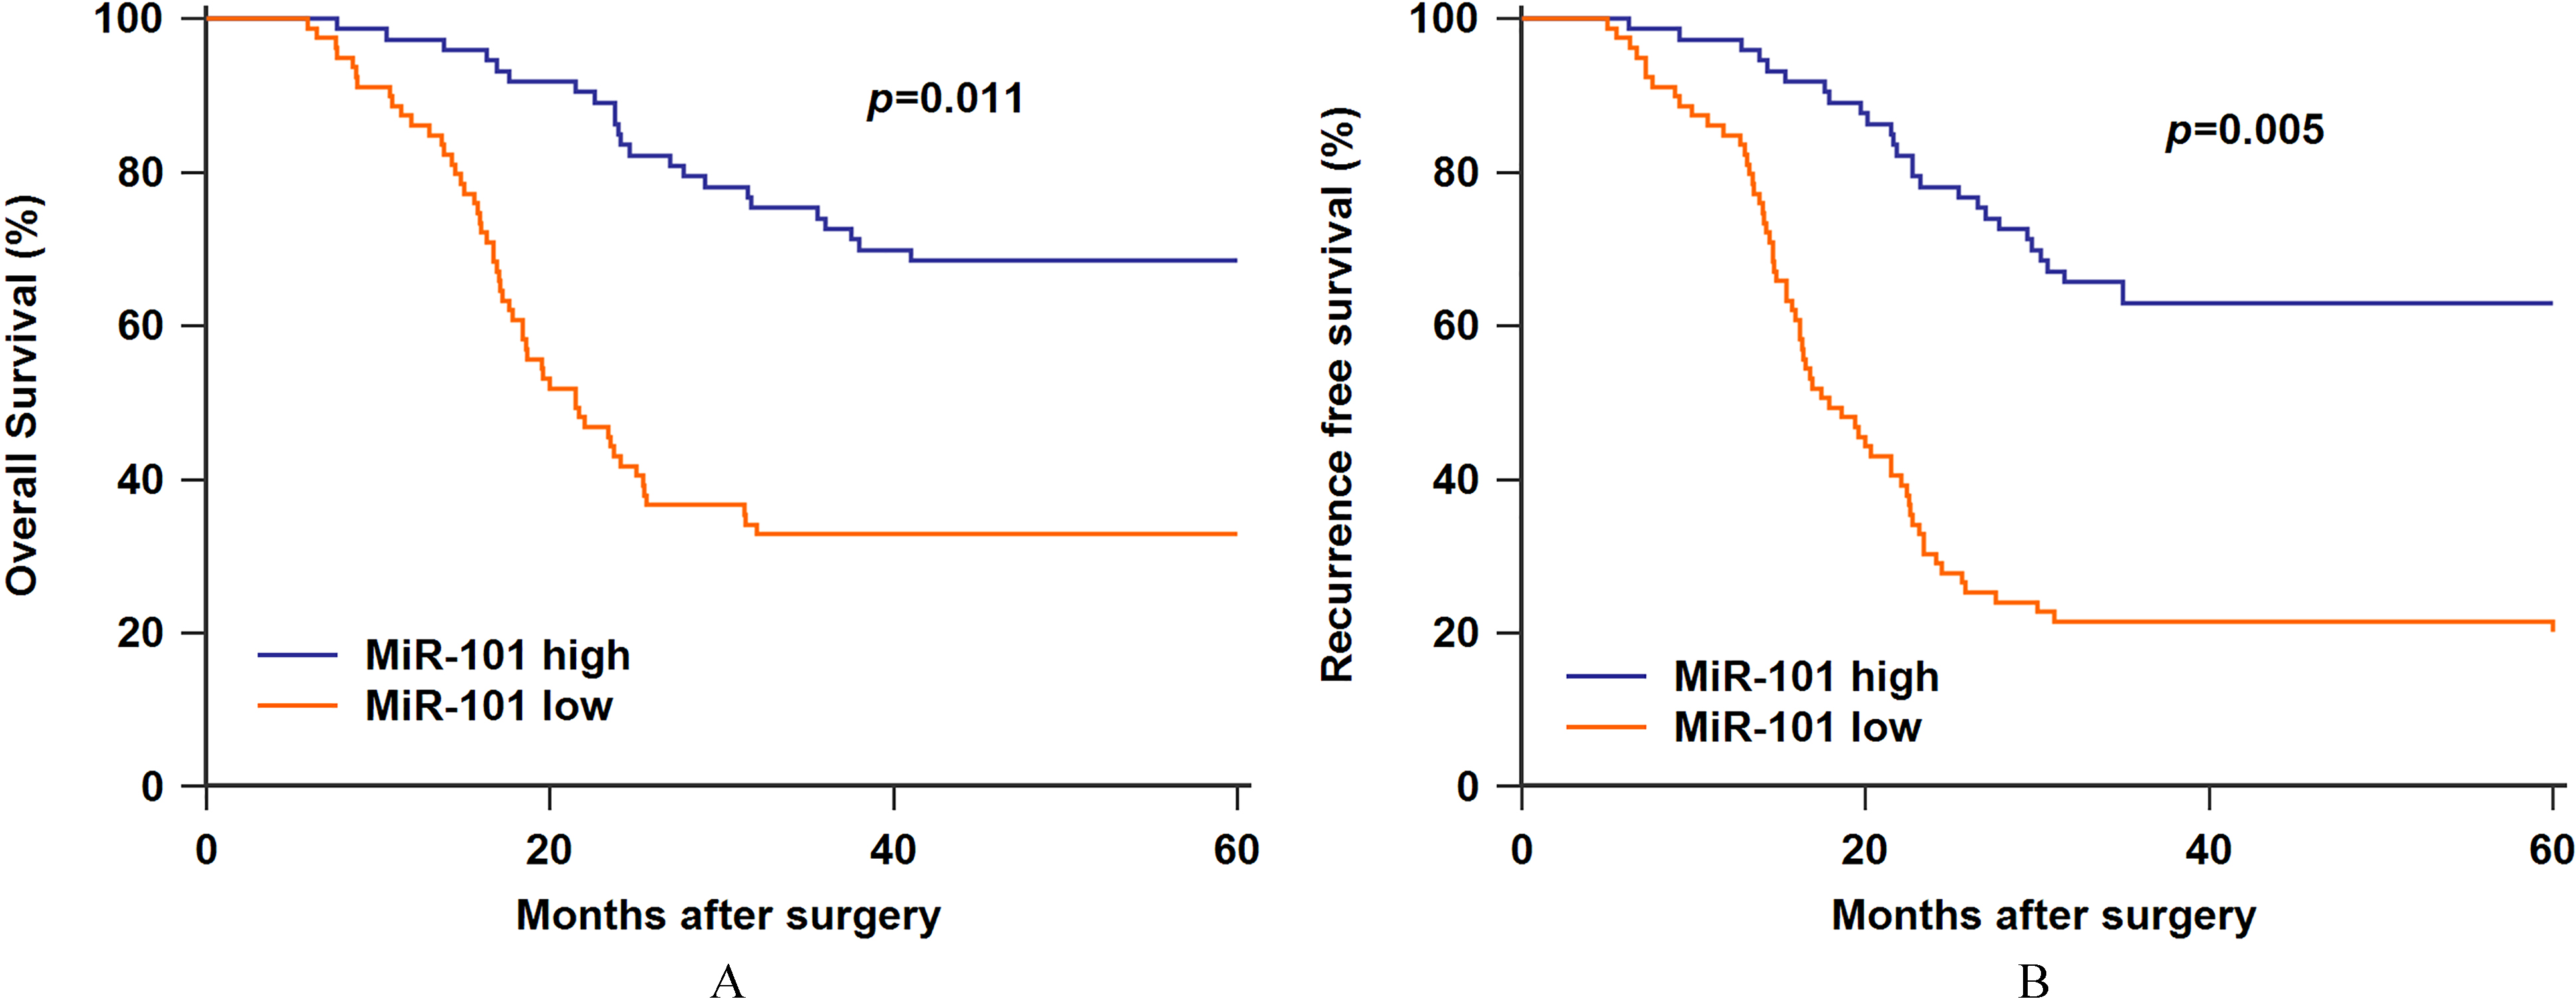 A. Low serum miR-101 expression was associated with worse overall survival. B. Low serum miR-101 expression was associated with worse recurrence free survival.